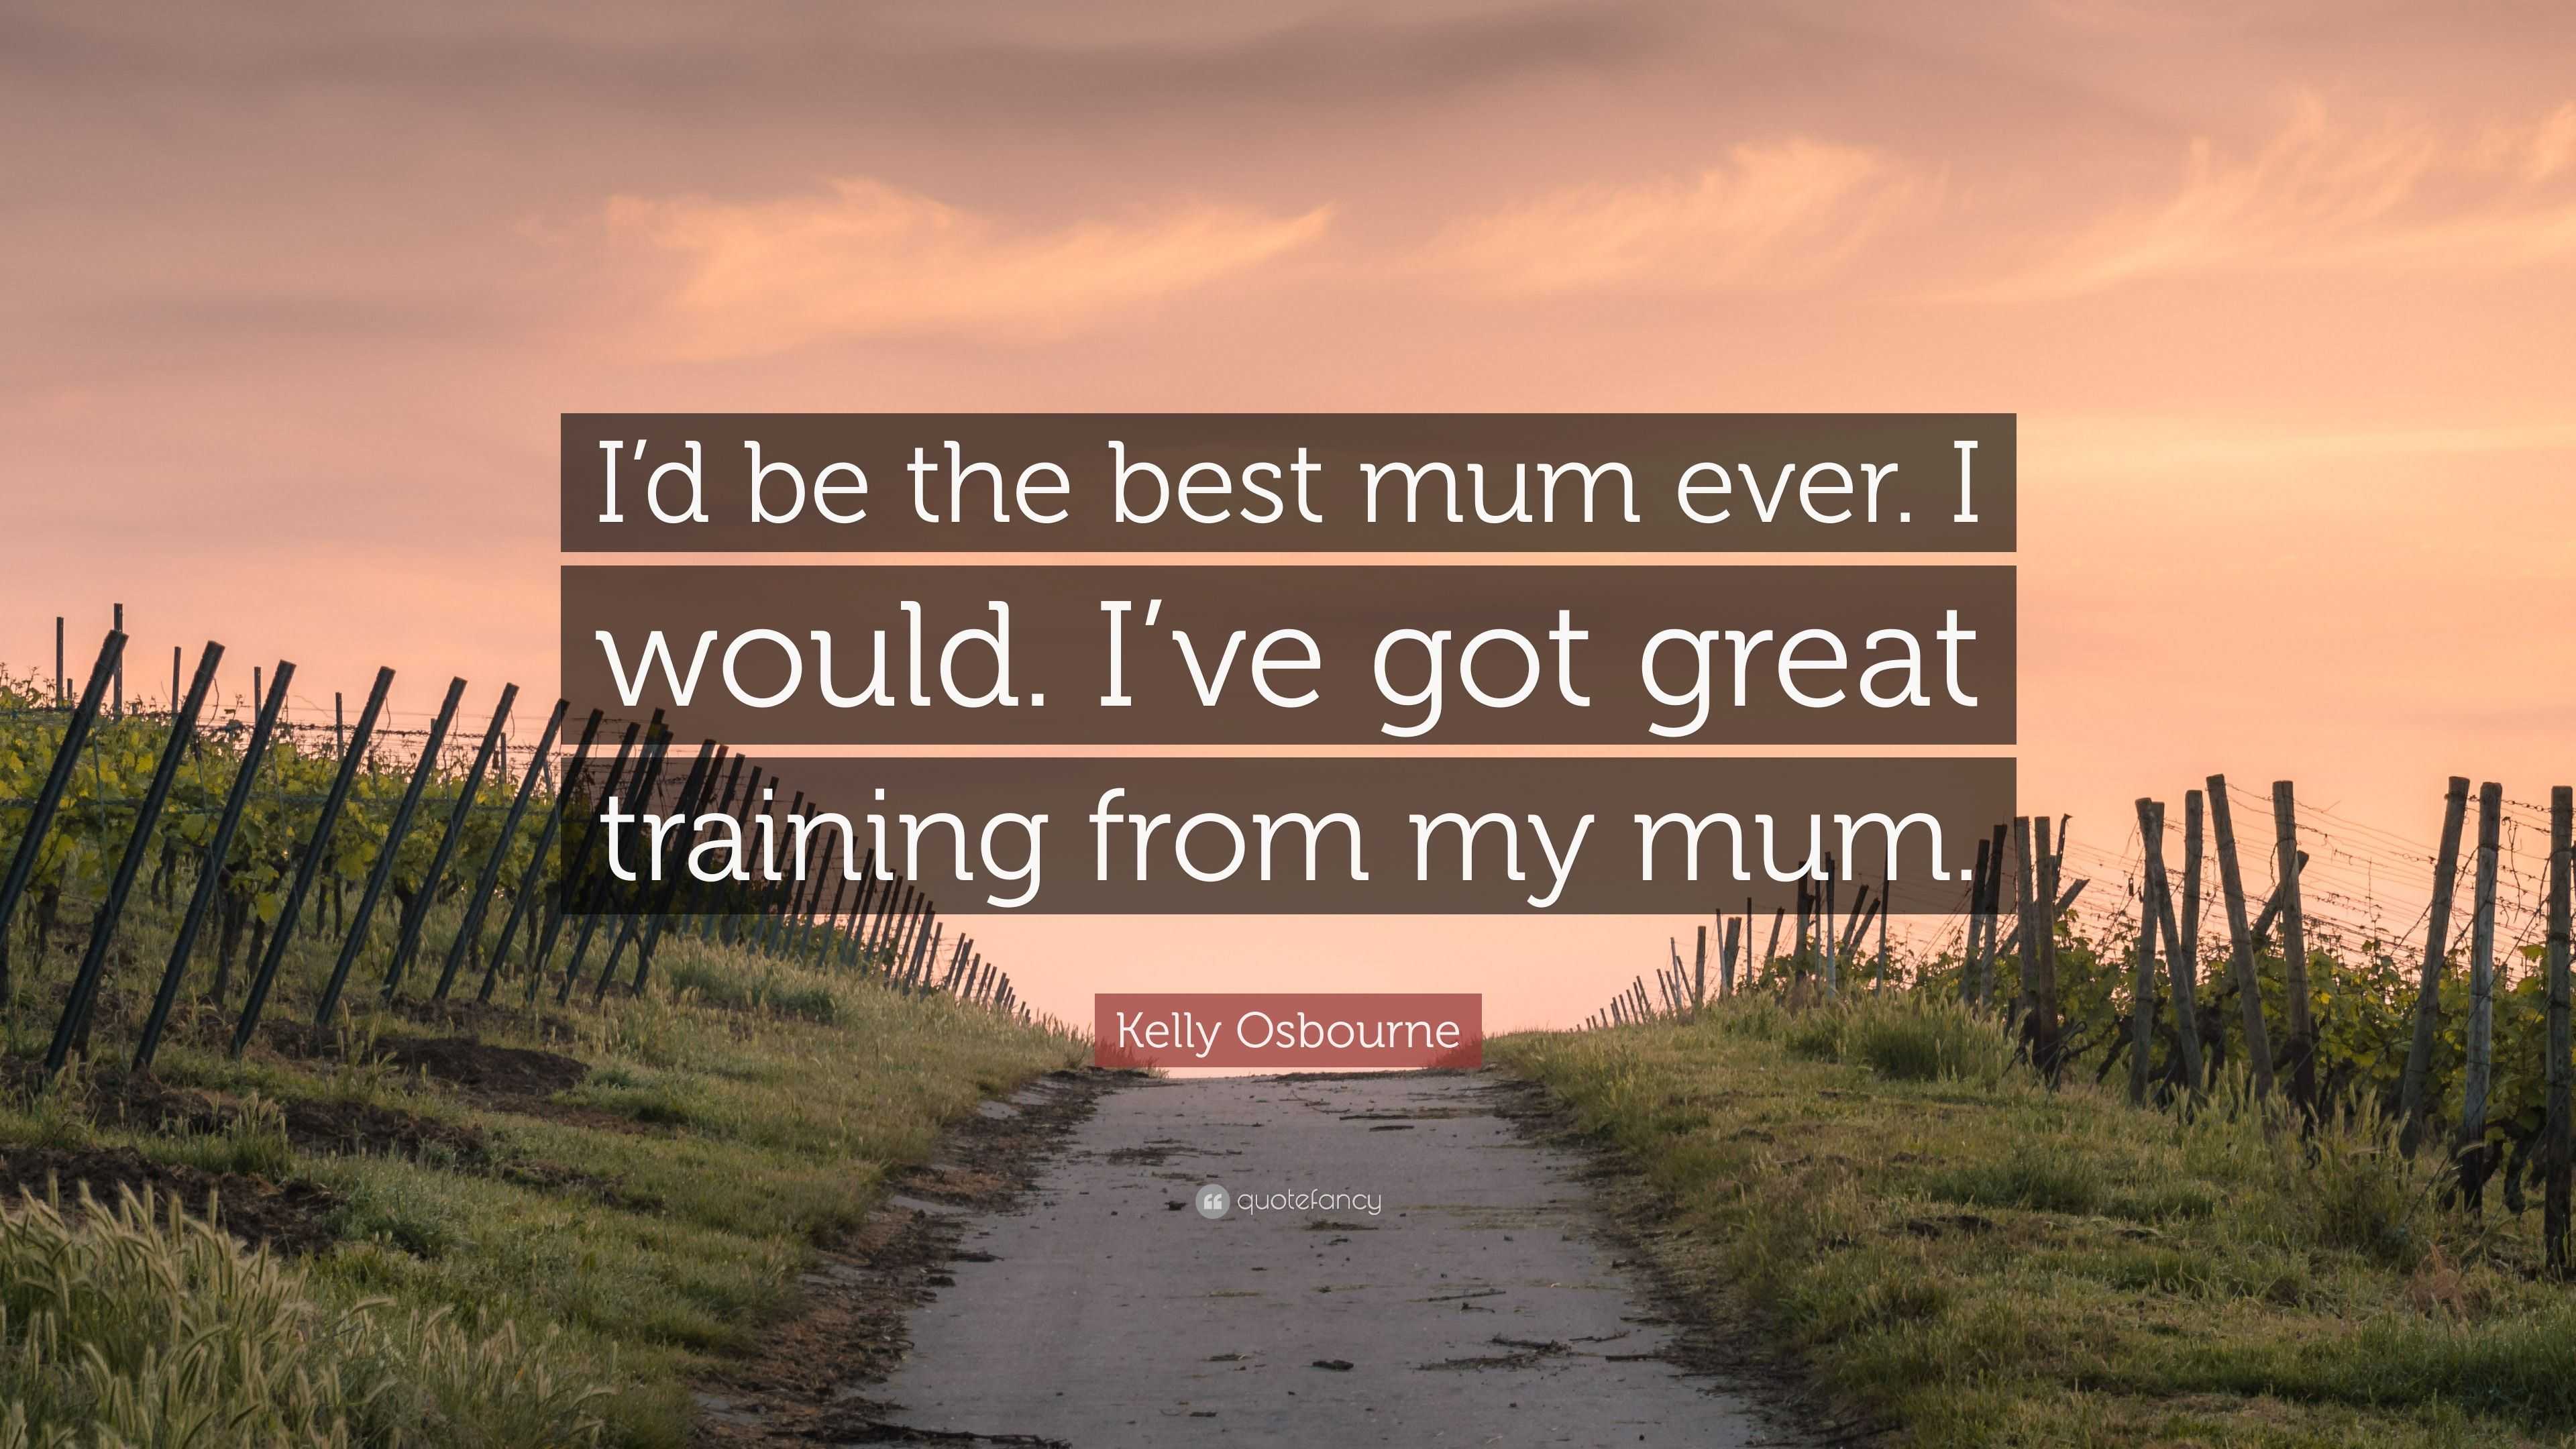 23 Epic Mom Quotes That Will Inspire You - Domestic Dee